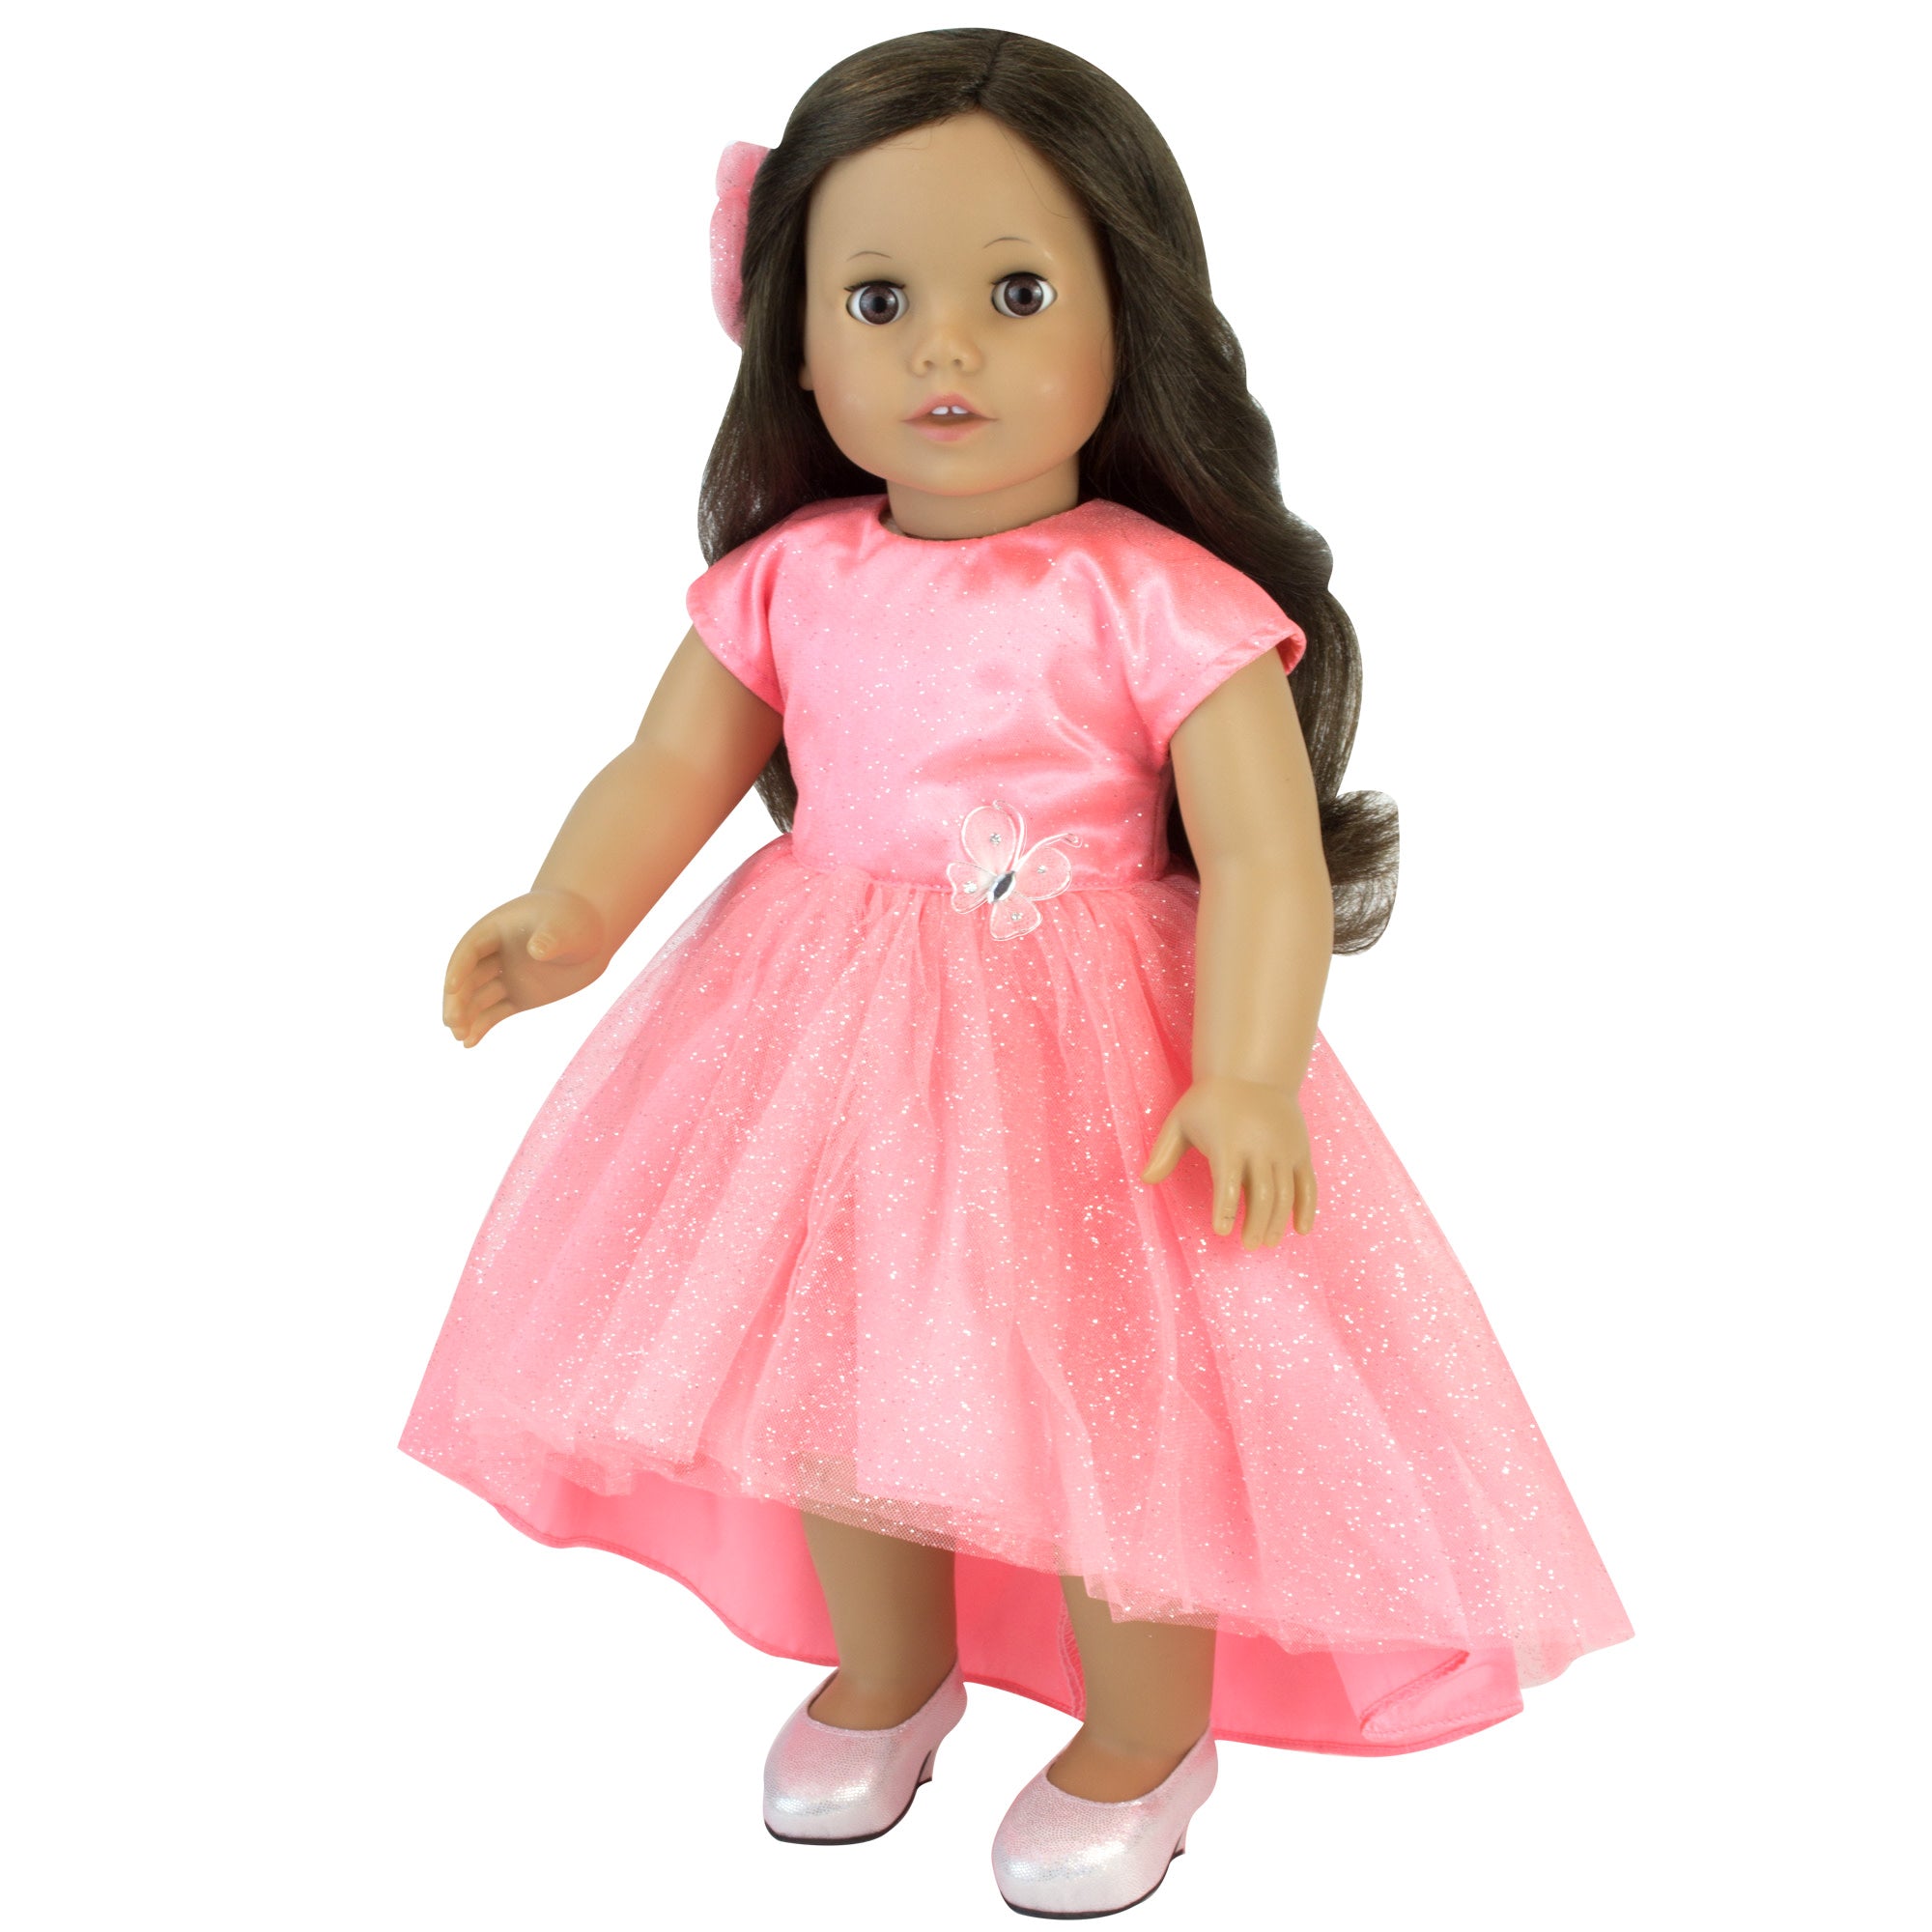 Sophia’s Hi-Low Hem Pink Sparkle Dress with Matching Tulle Hair Accessory for 18” Dolls, Coral